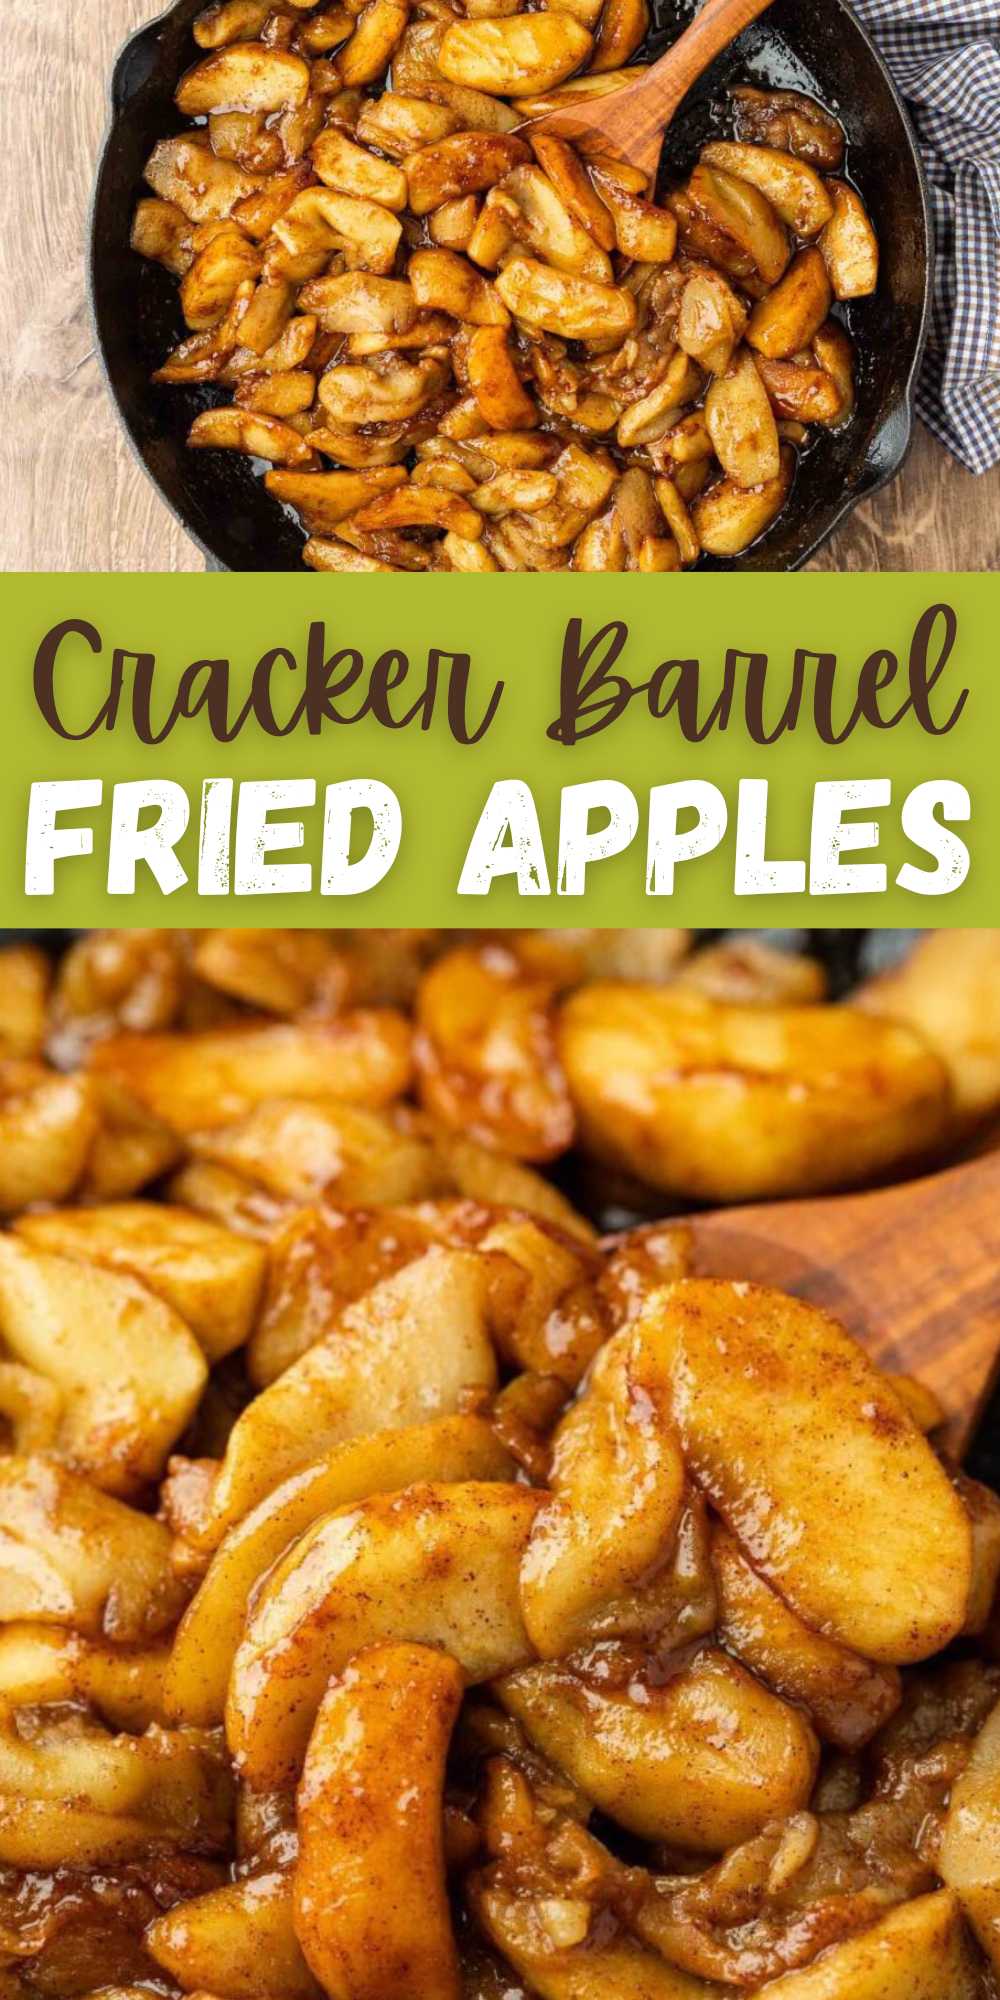 Cracker Barrel Fried Apples is a family favorite recipe. It is easy to make and full of flavor. Fried apples is great served over ice cream. We love the combination of the cinnamon and sugar flavor. It is the perfect sweet treat to serve in many different ways. #eatingonadime #crackerbarrelfriedapples #friedapples